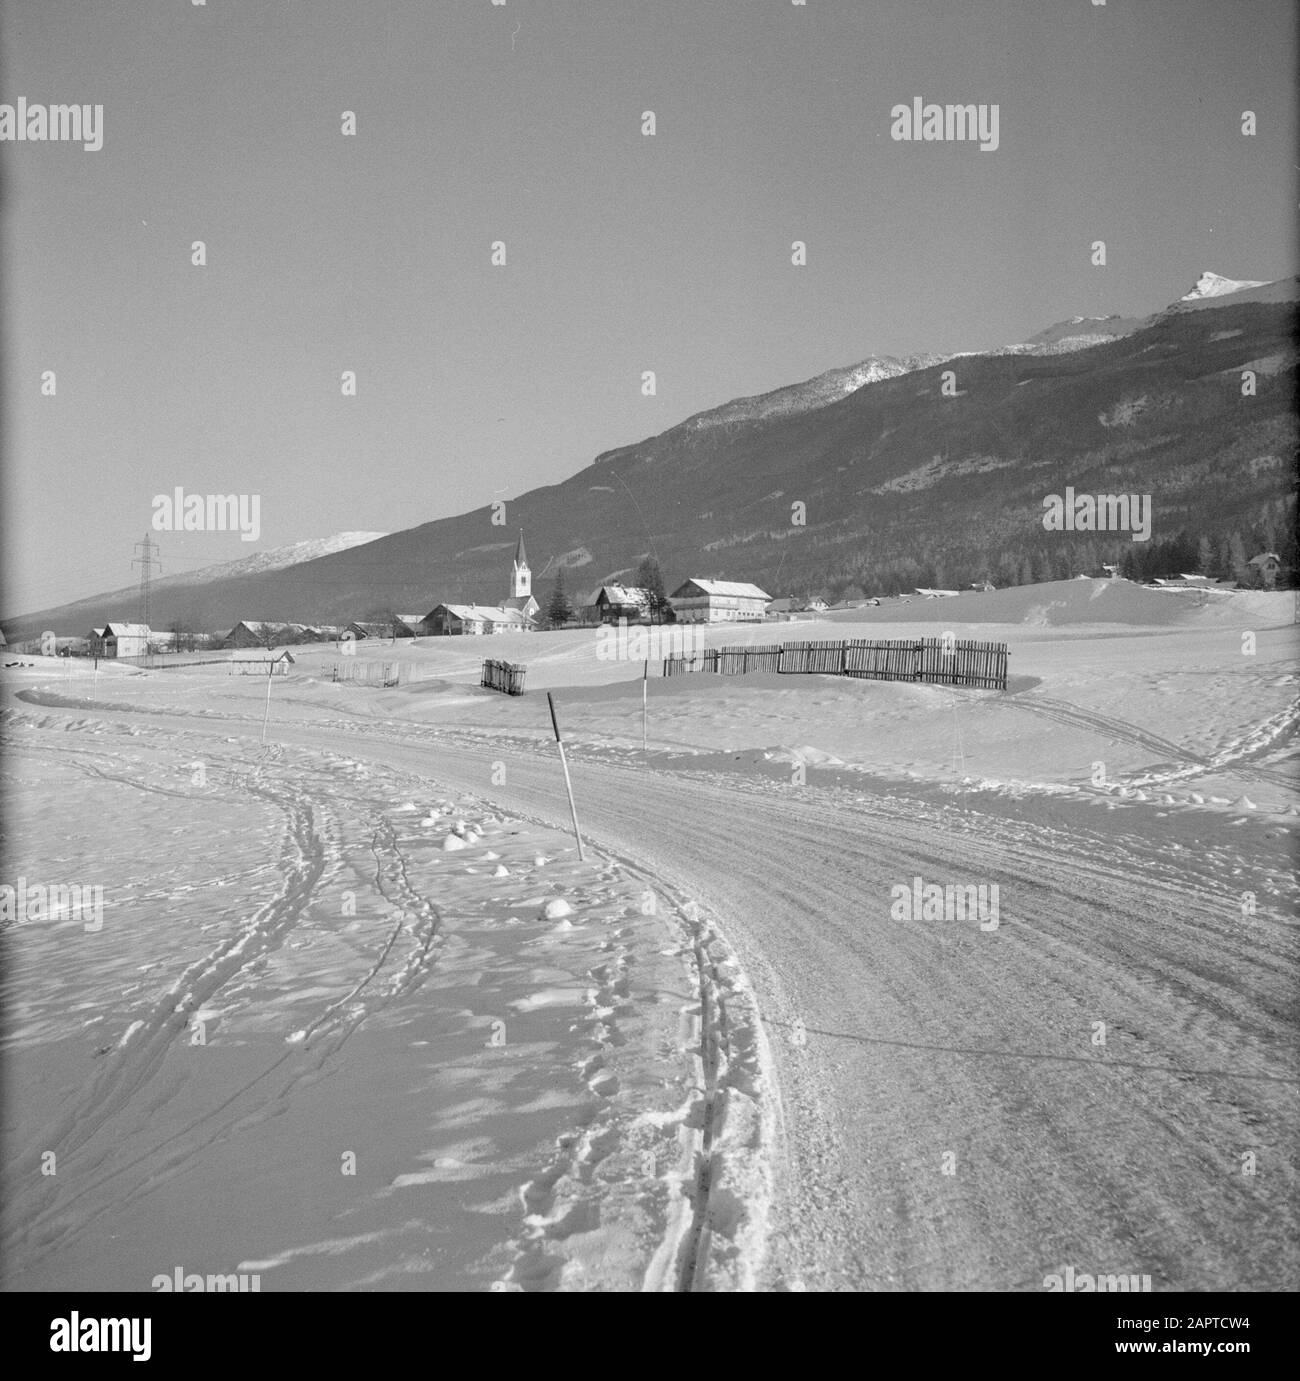 Winter in Tirol  View of Sistrans in the snow Date: January 1960 Location: Austria, Sistrans, Tyrol Keywords: mountains, villages, landscapes, snow, winter Stock Photo